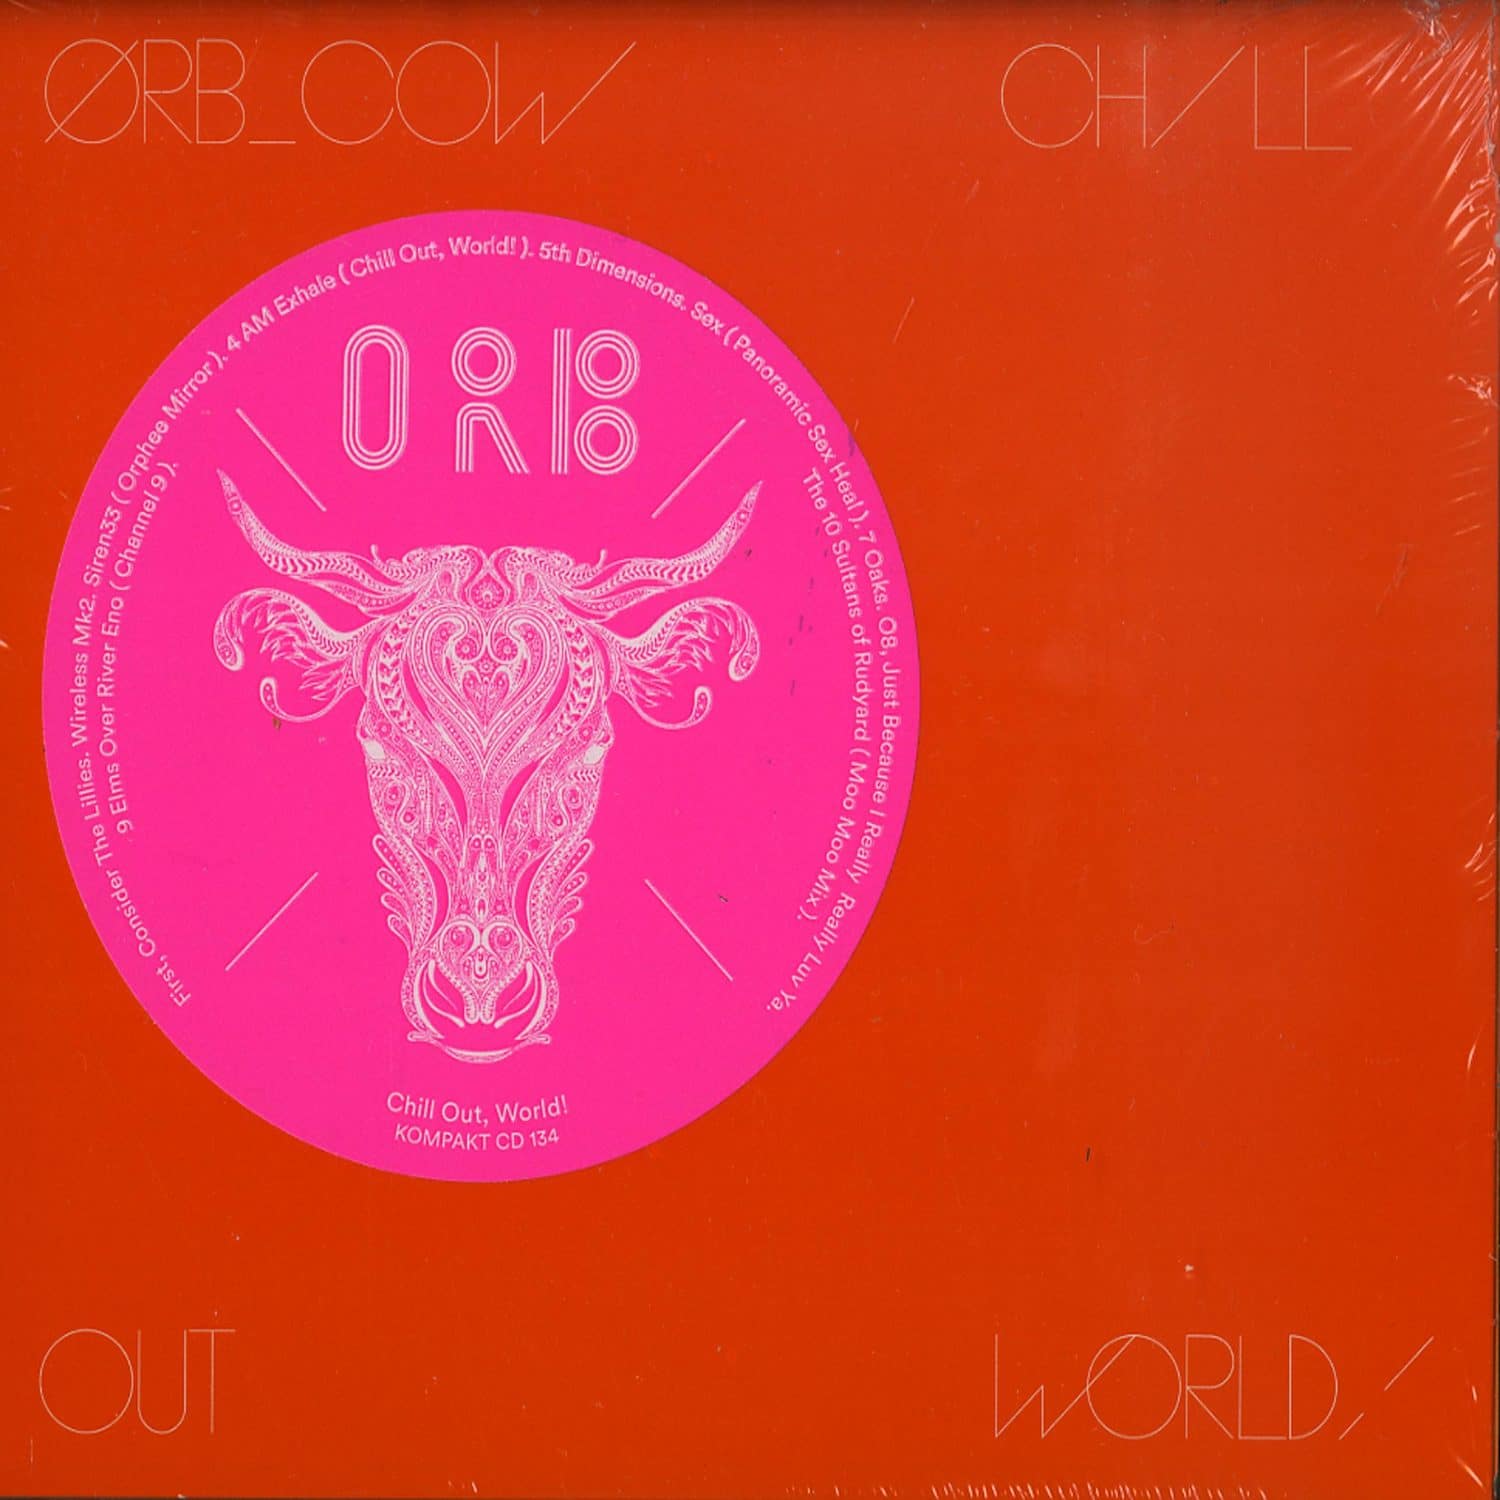 The Orb - COW / CHILL OUT WORLD 